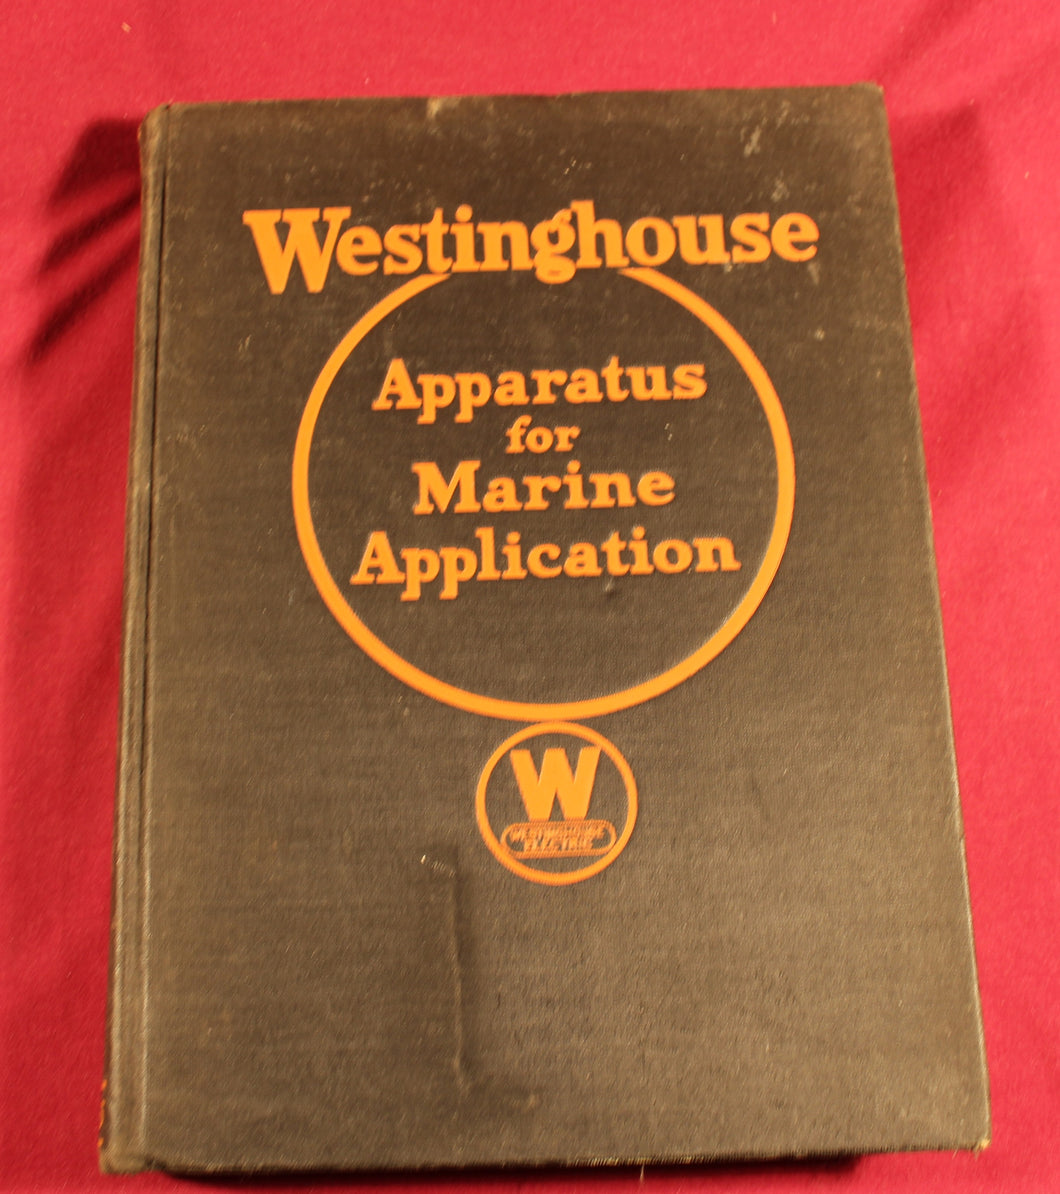 Vintage 1925-26 Westinghouse Apparatus for Marine Application - catalog manual booklet